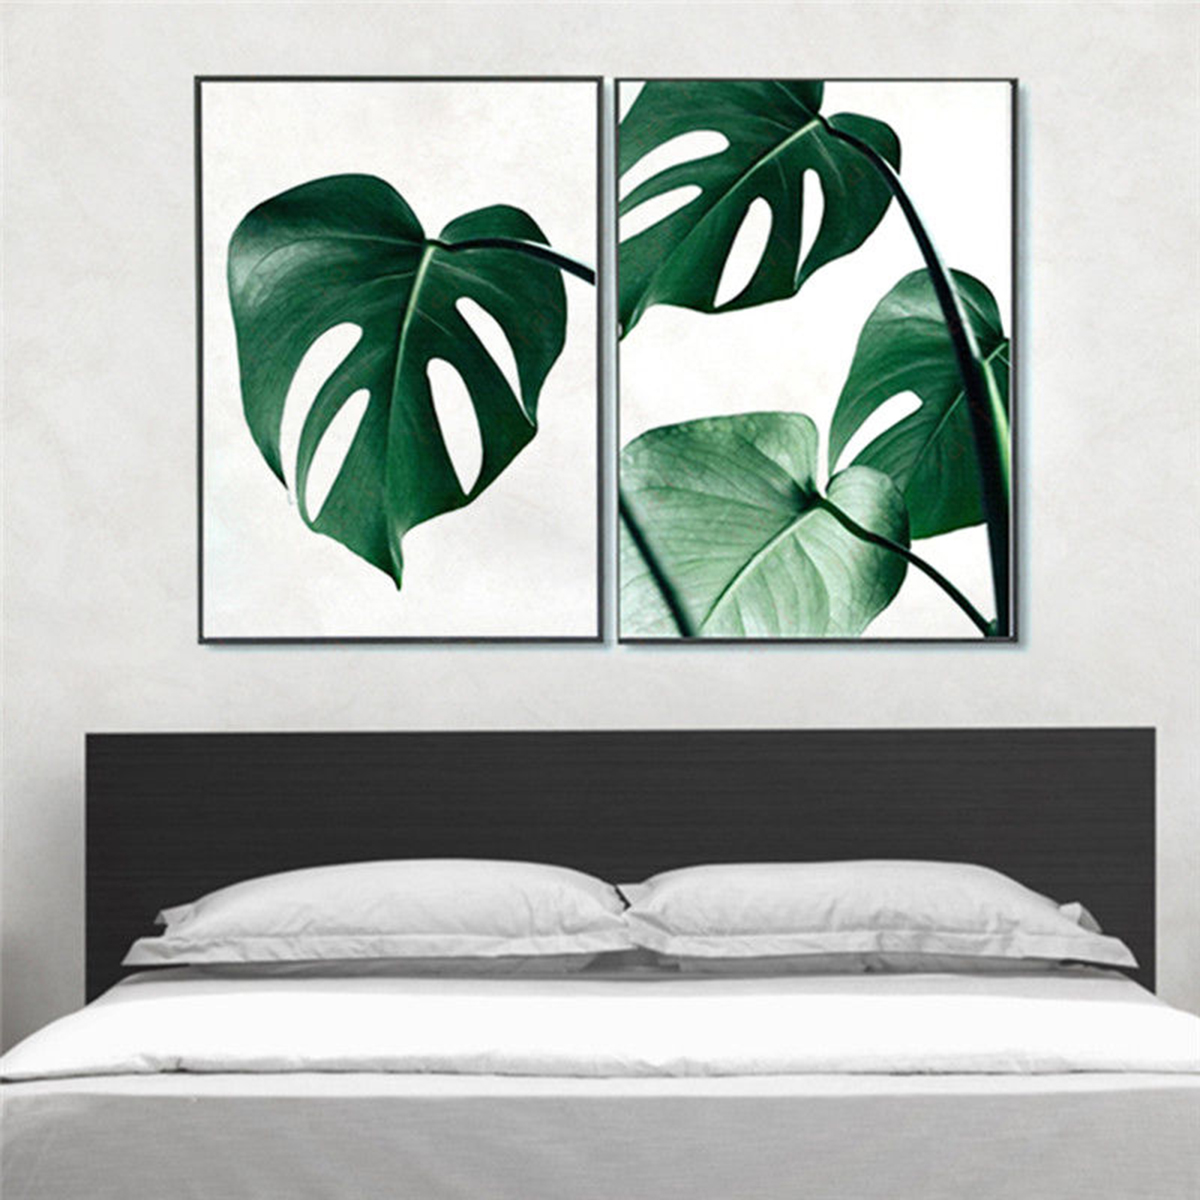 1-Piece-Canvas-Print-Painting-Nordic-Green-Plant-Leaf-Canvas-Art-Poster-Print-Wall-Picture-Home-Deco-1743641-4